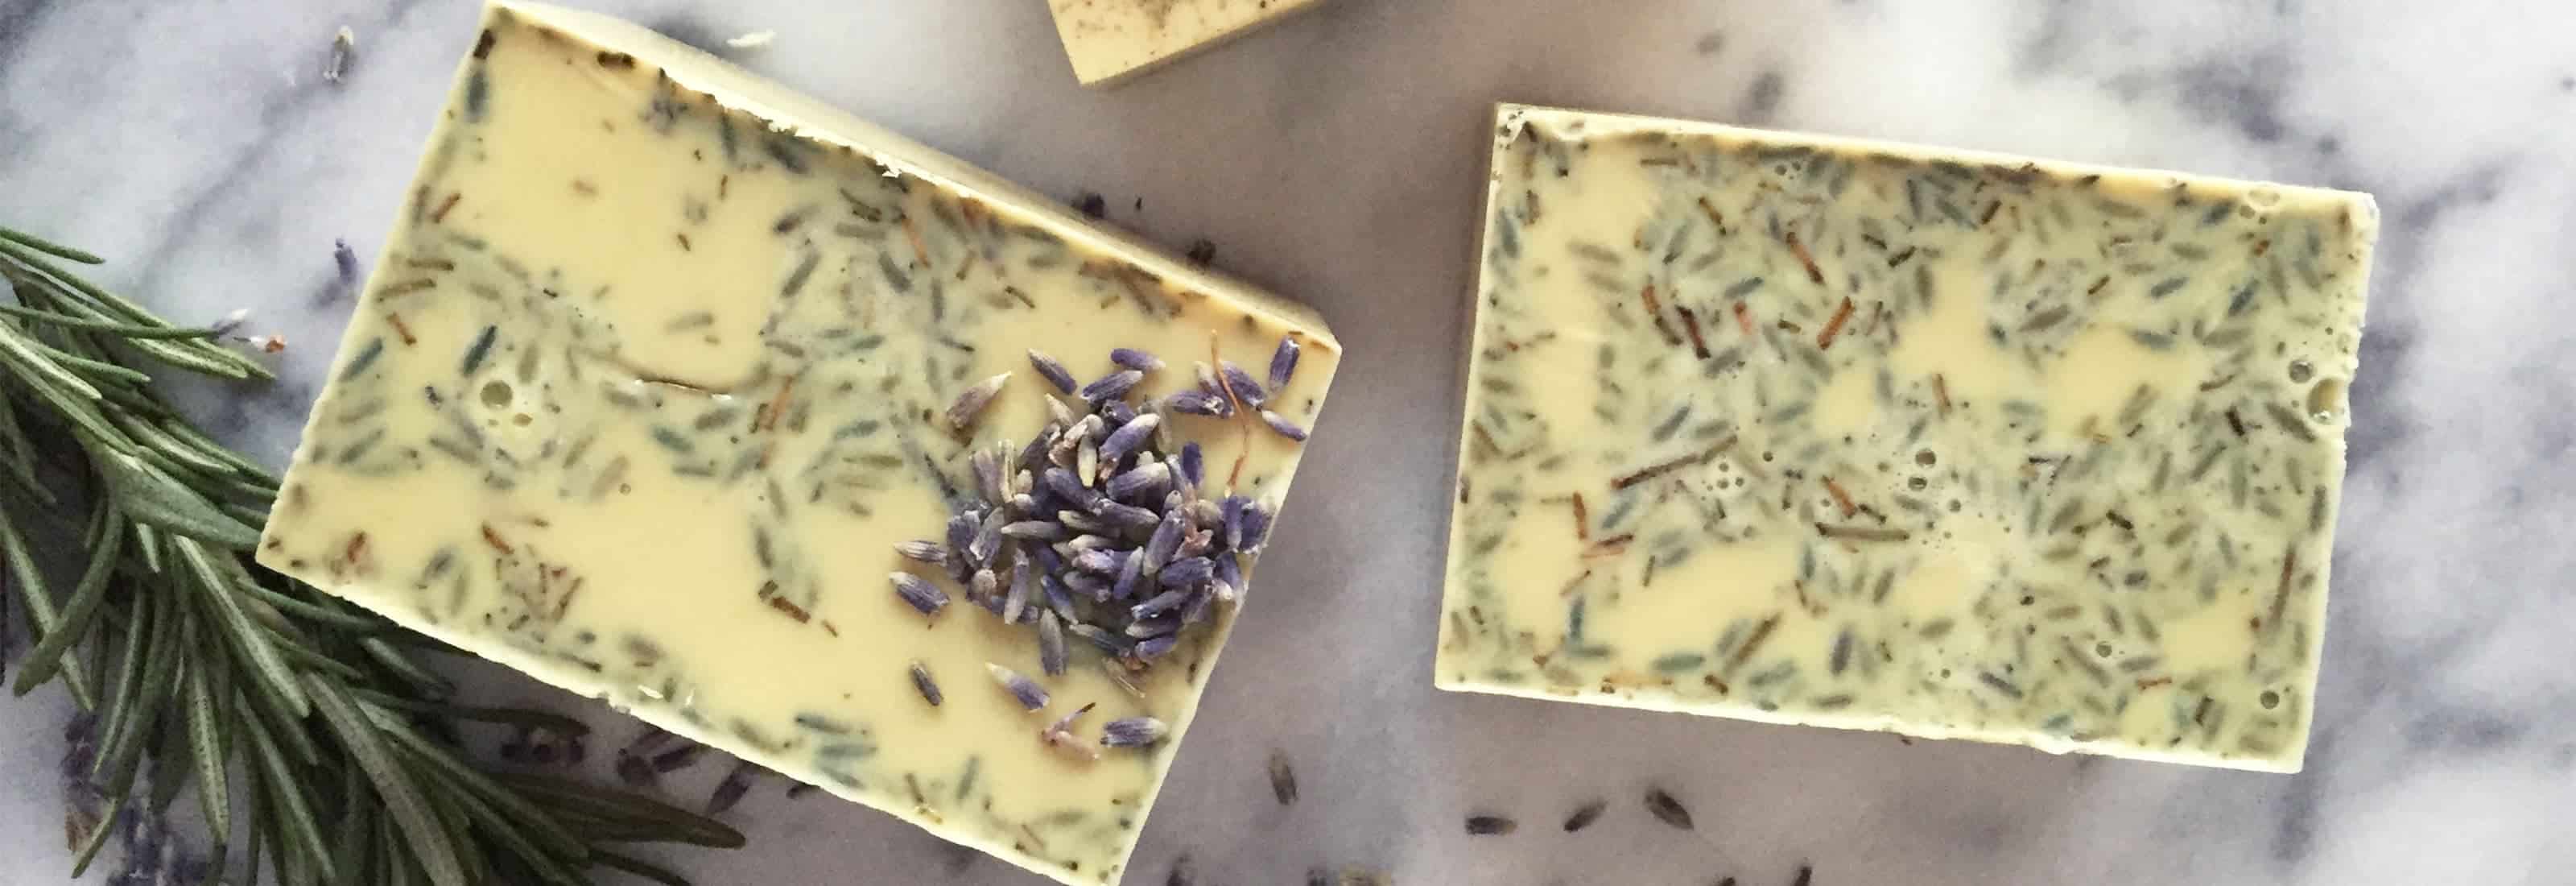 Lavender and rosemary soap